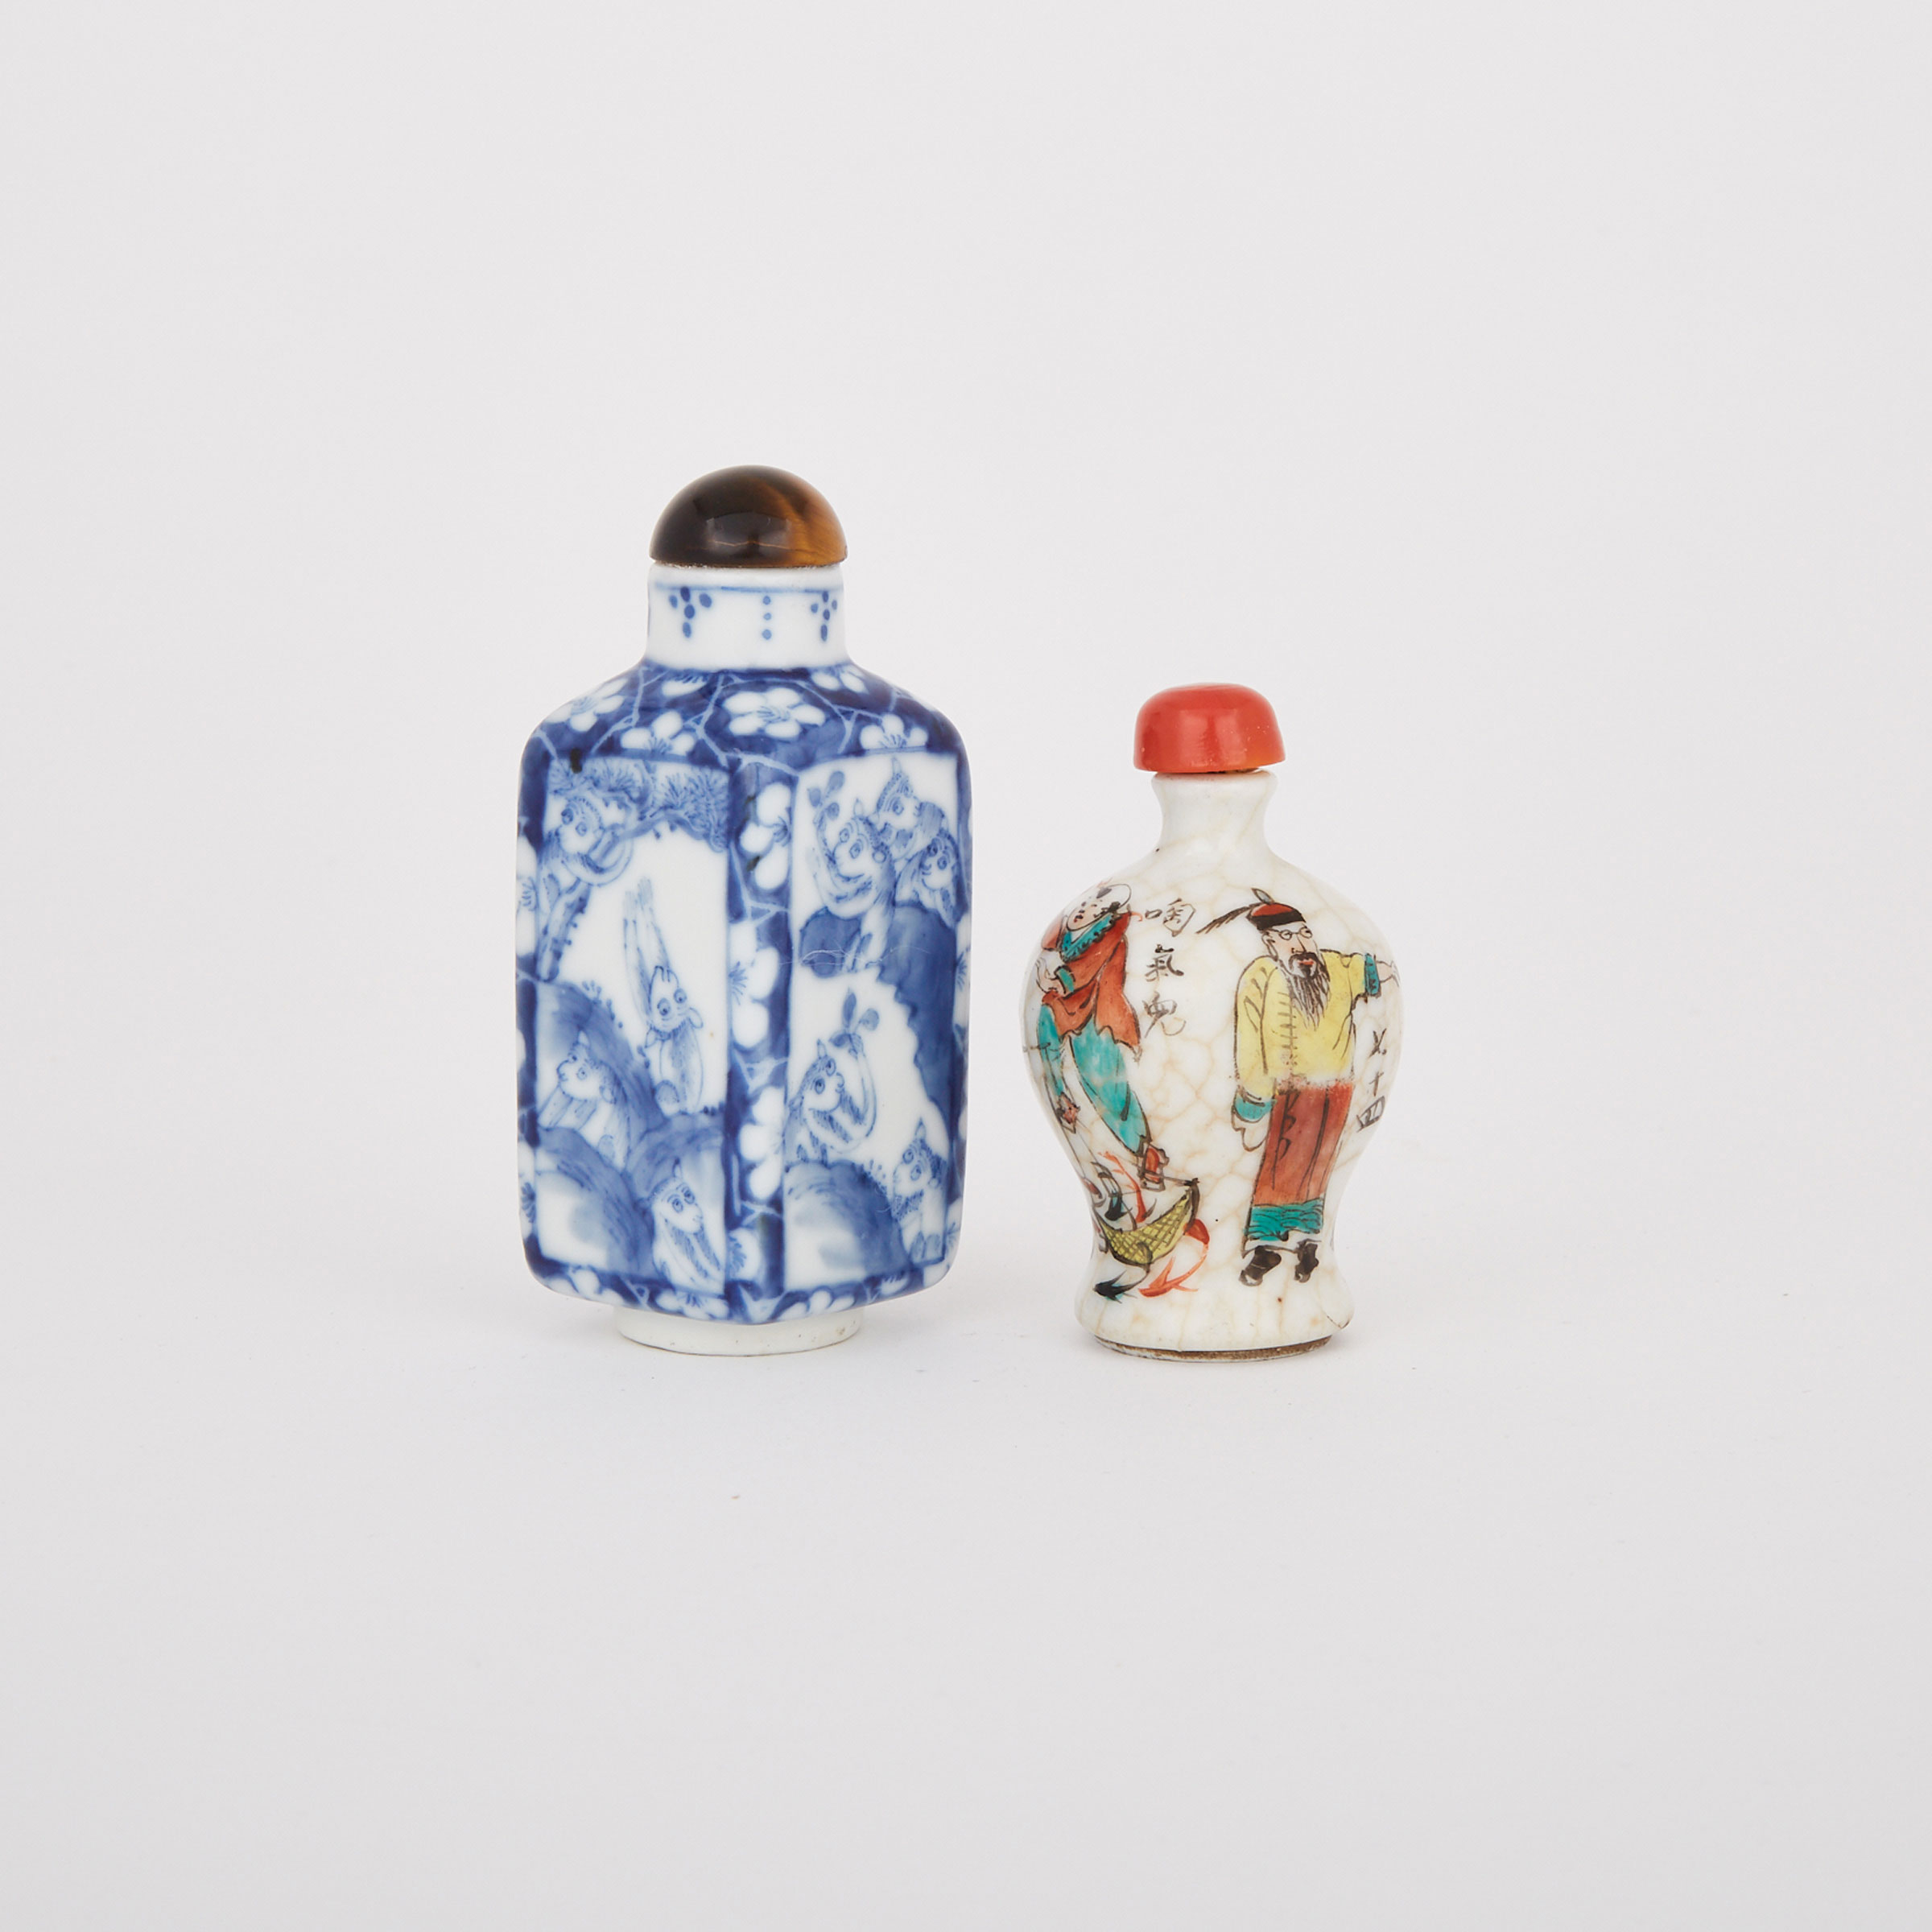 Two Porcelain Snuff Bottles, 19th/20th Century